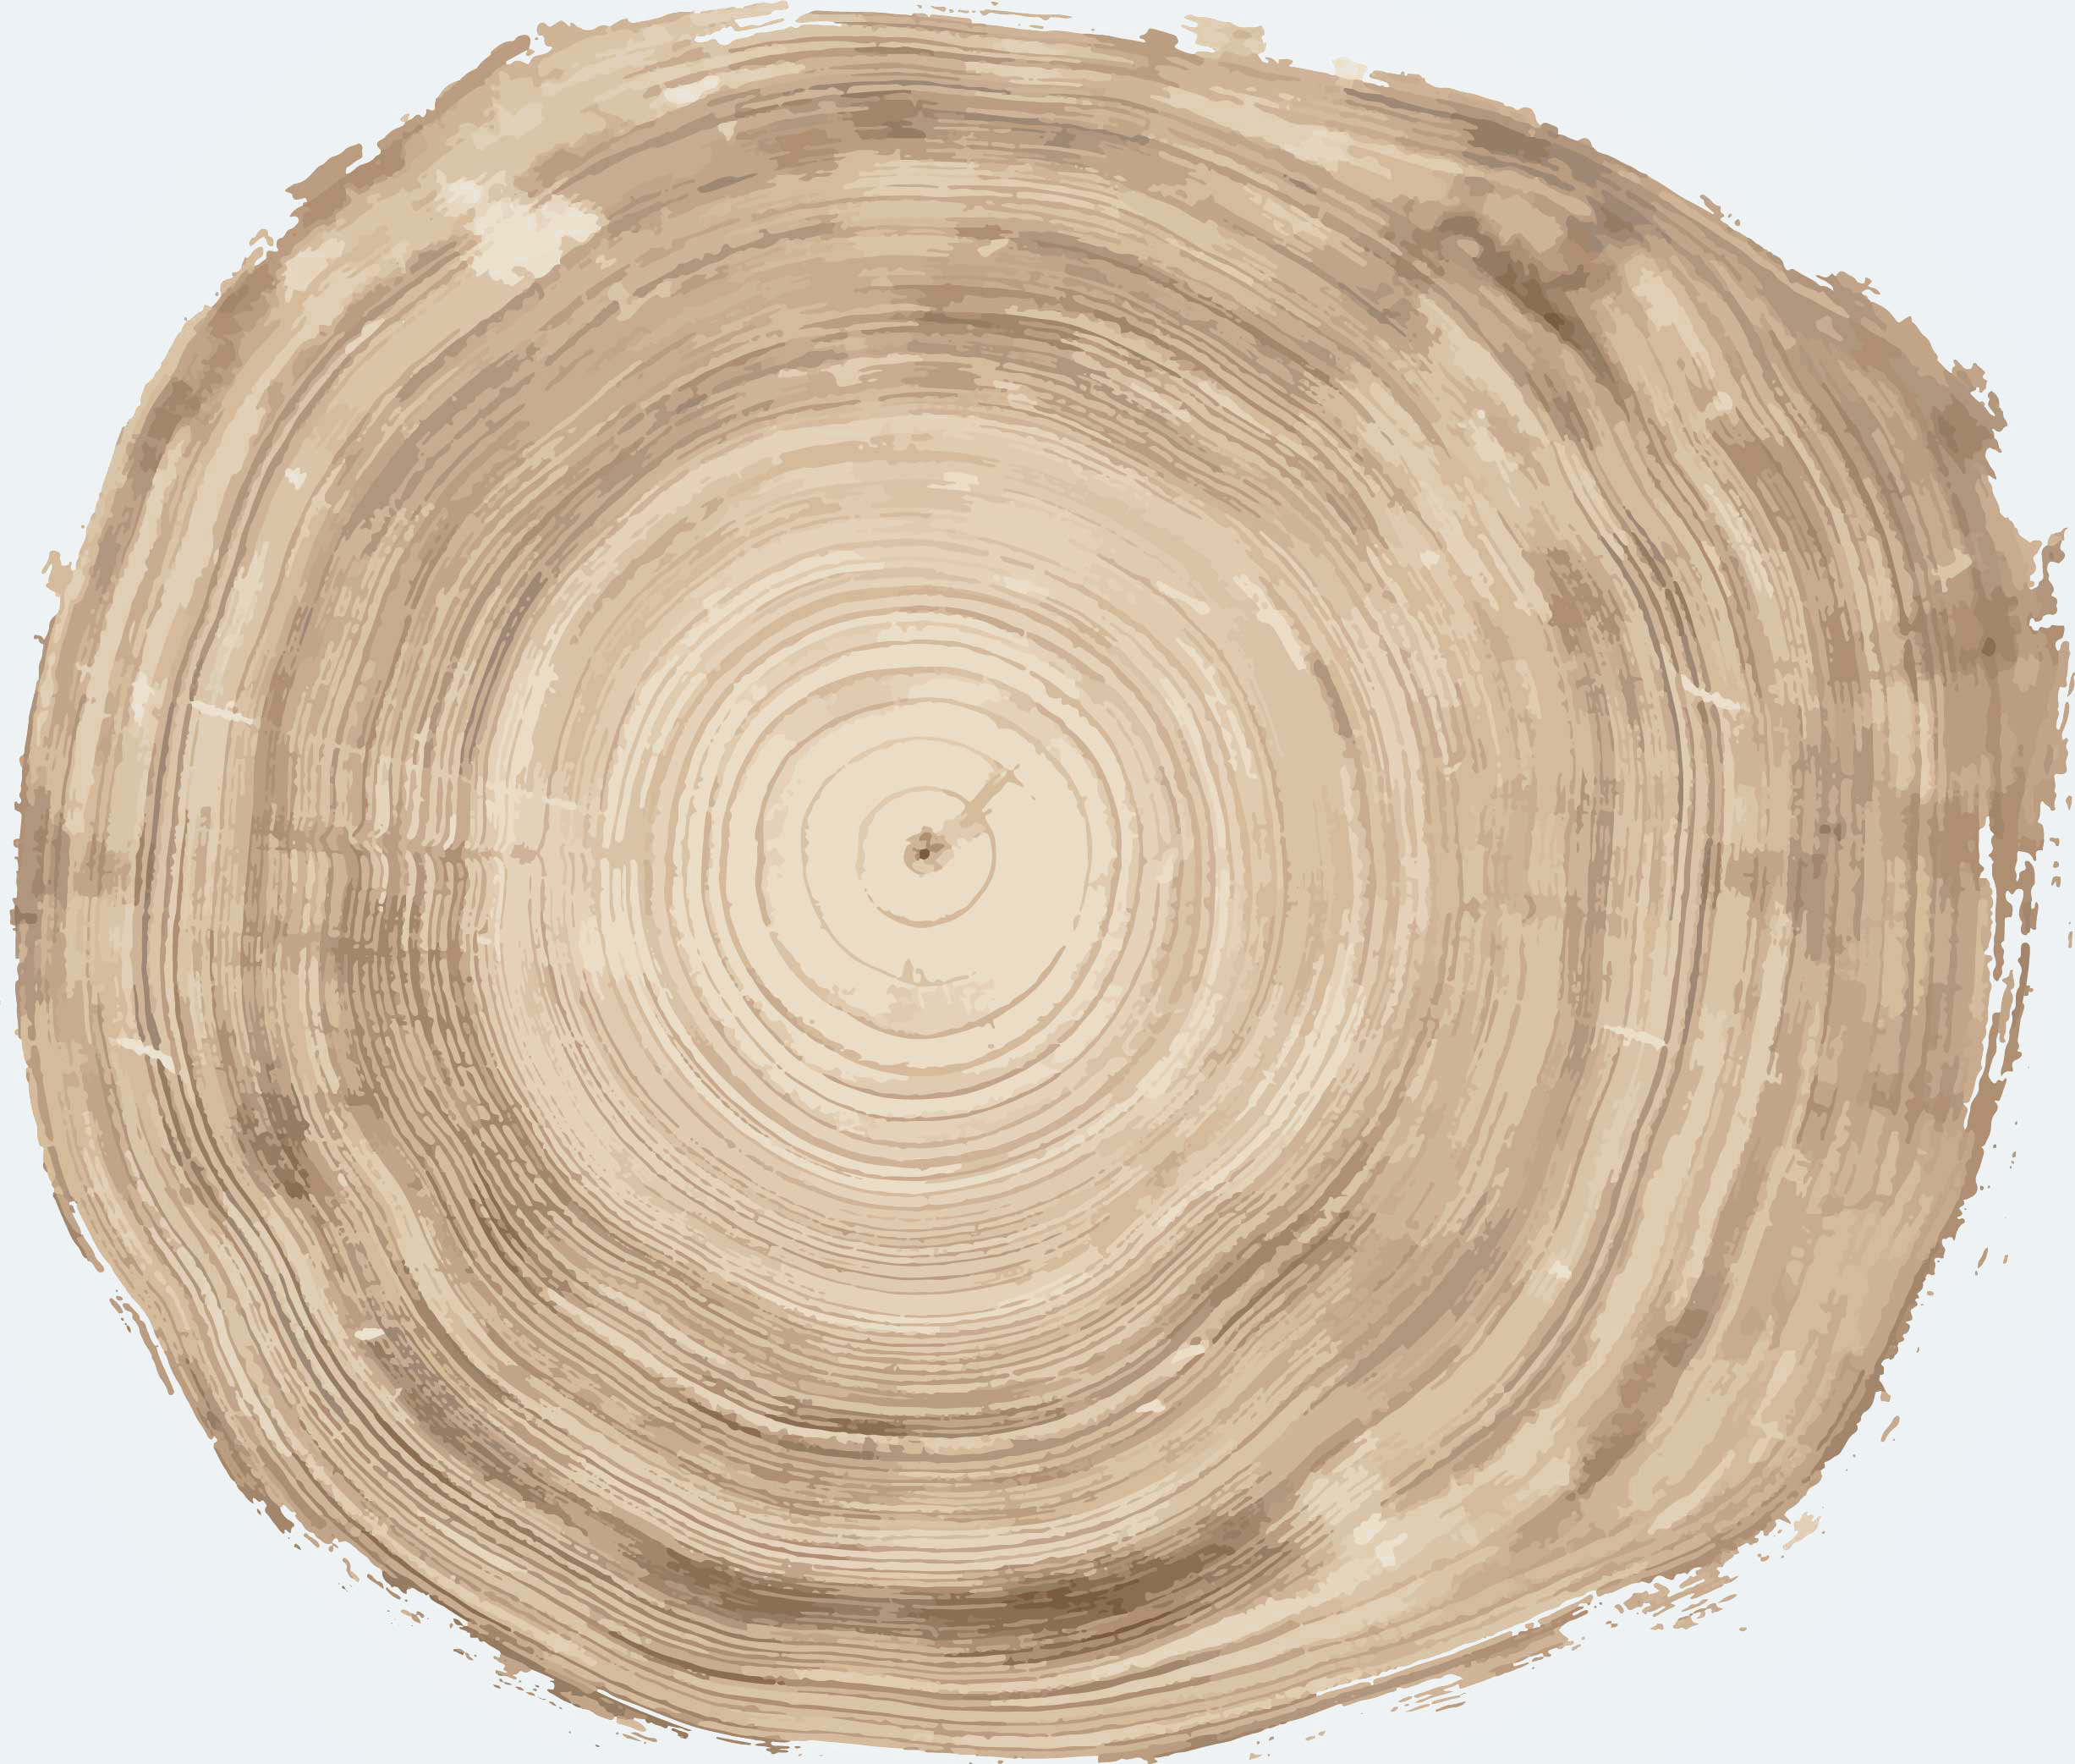 Tree rings. The following links are dates connected to the rings organized non-linearly. Clicking on a date will take you to more information about the date.